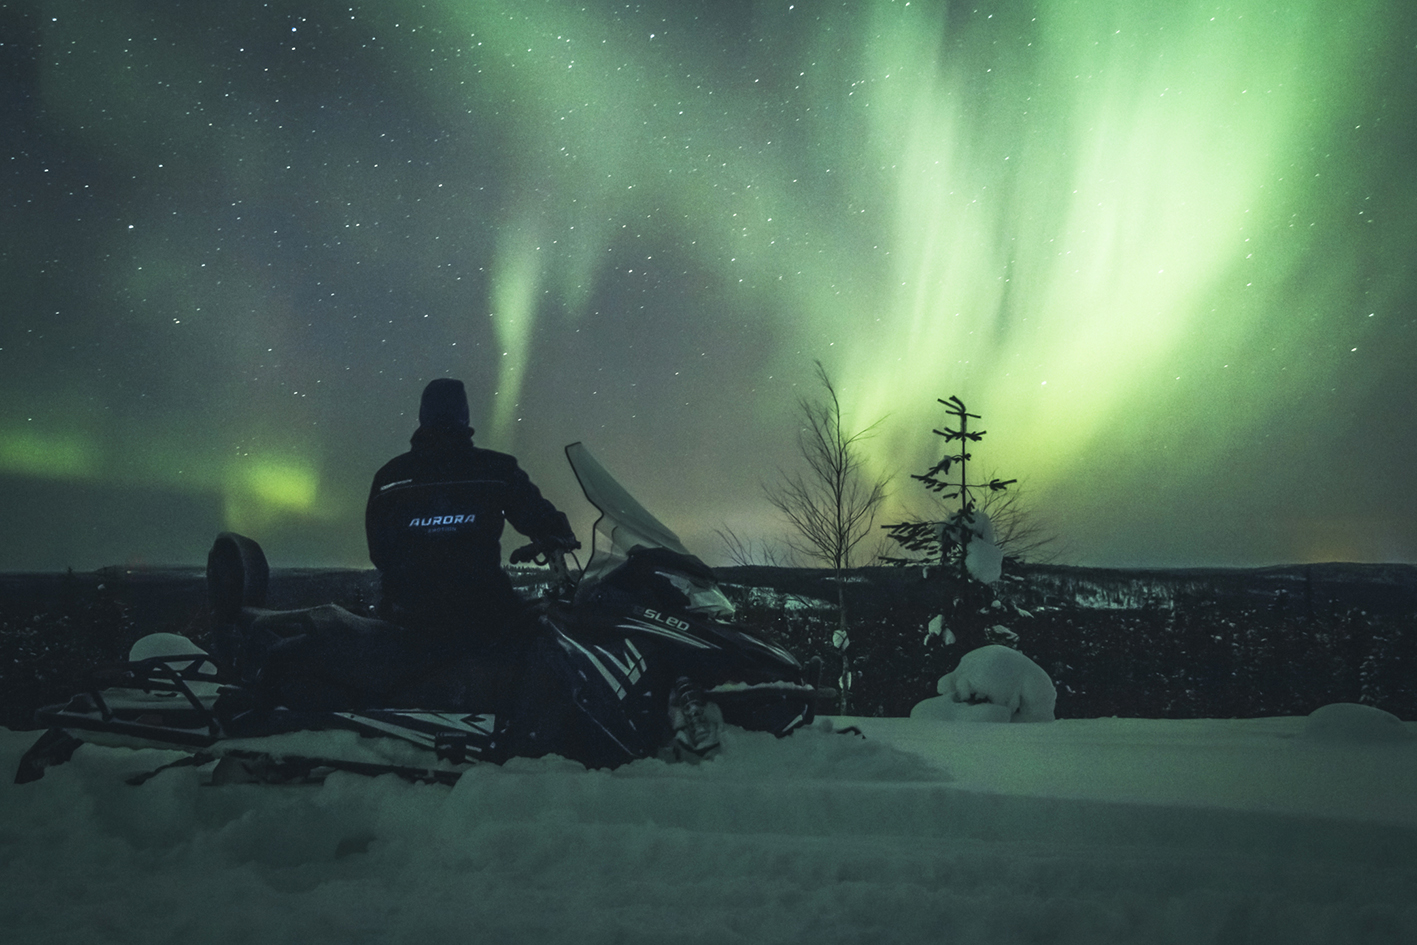 Aurora Powertrains originates from Lapland and is the world's first provider of guided tours with electric snowmobiles. The eSled has a range of up to 100 kilometers.